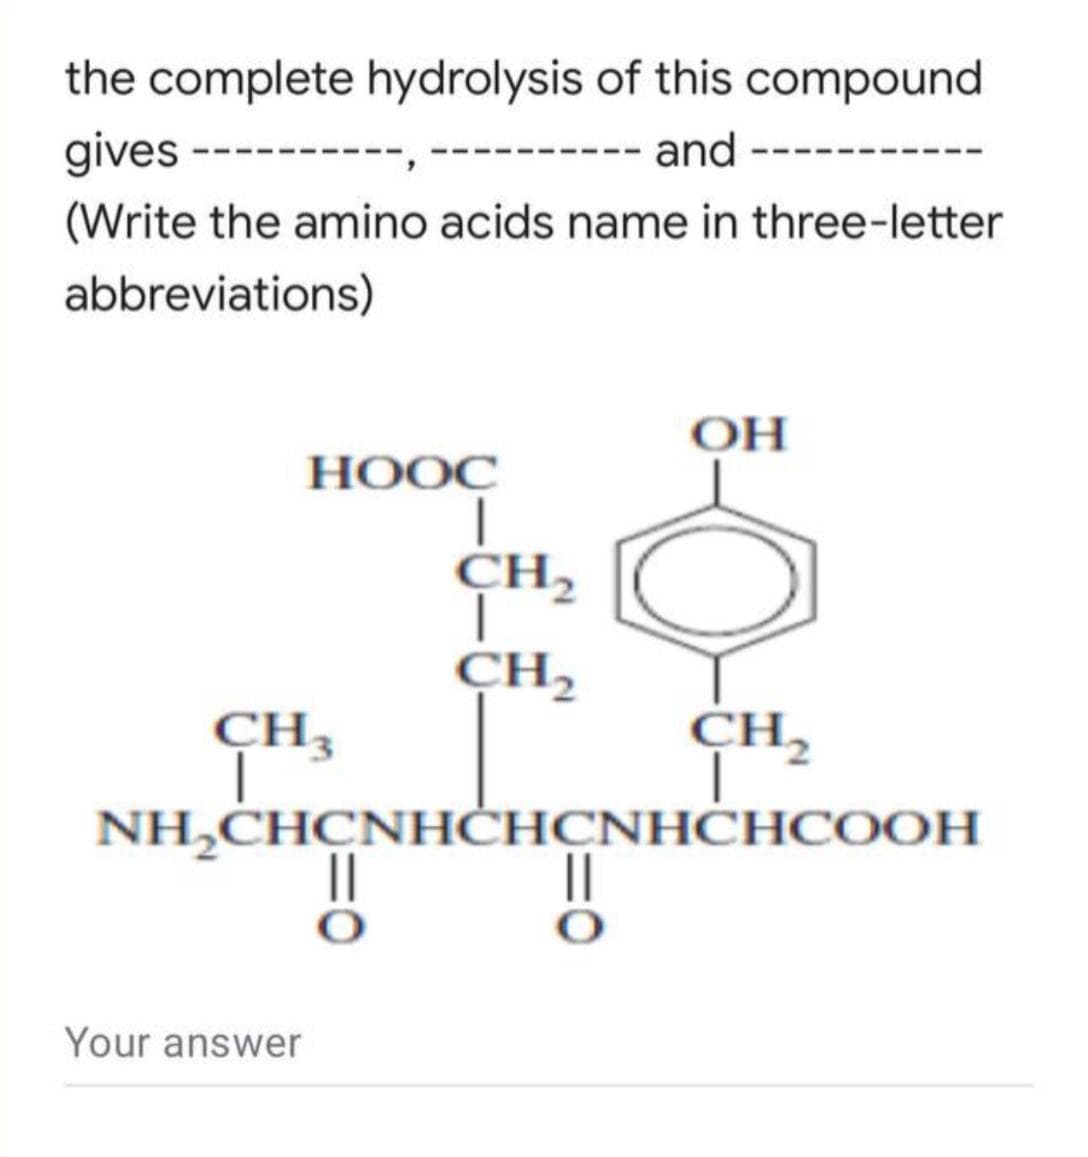 the complete hydrolysis of this compound
gives -
-- and ---
(Write the amino acids name in three-letter
abbreviations)
НООС
CH,
CH,
CH3
CH,
NH,CHCNHĊHCNHĊHCOOH
Your answer
